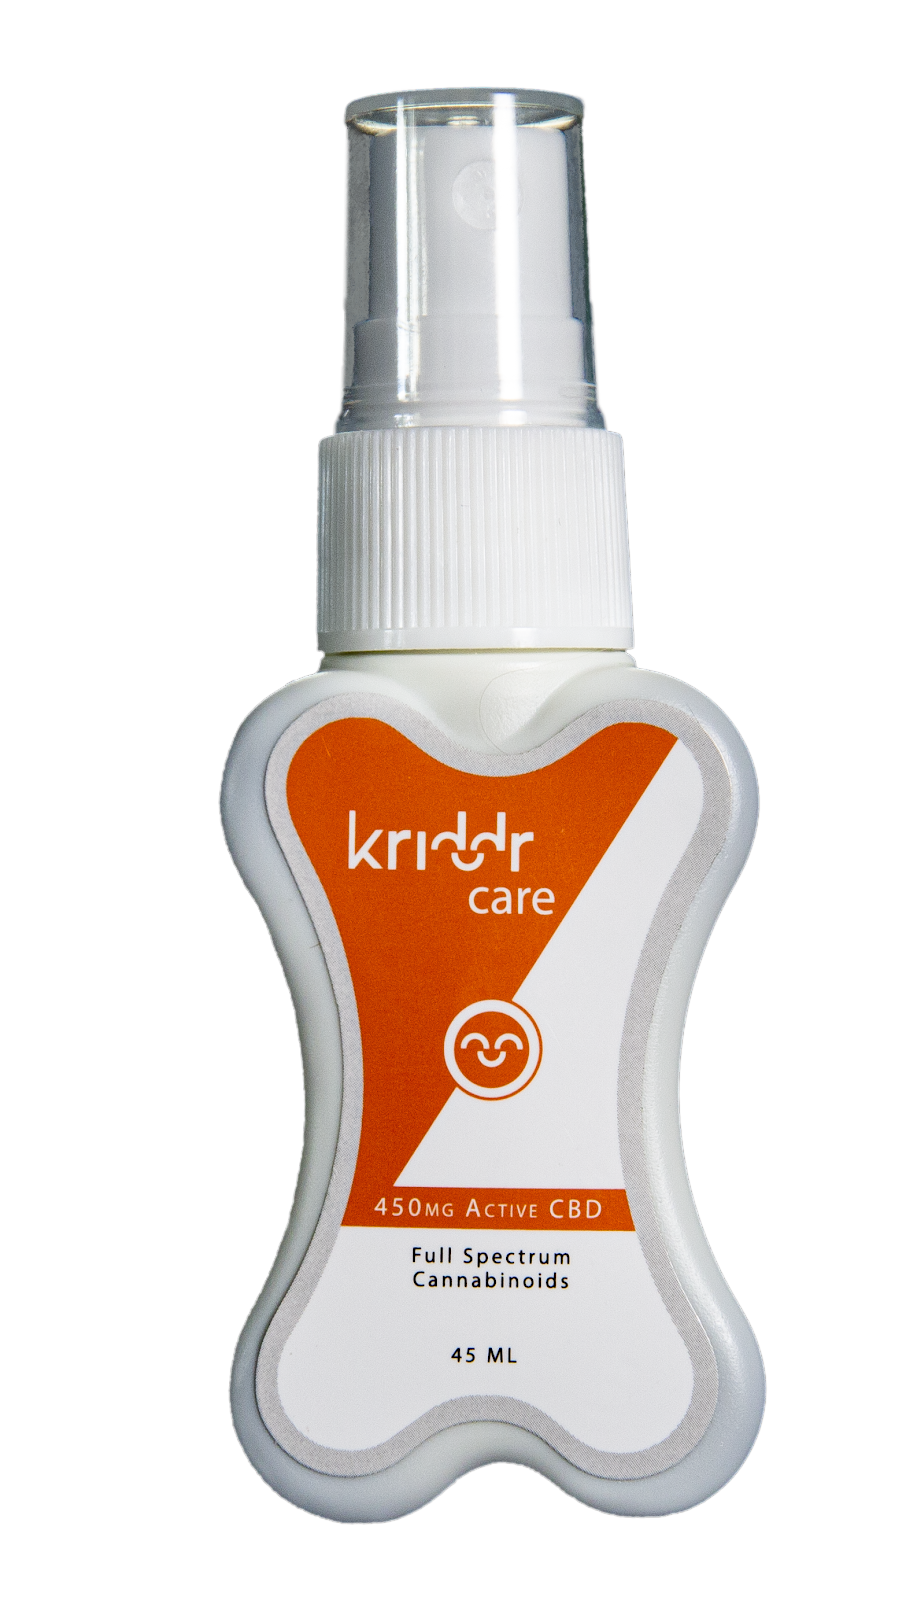 Kriddr Care | 19 Forge Hill Rd, Barkhamsted, CT 06063 | Phone: (339) 225-0180